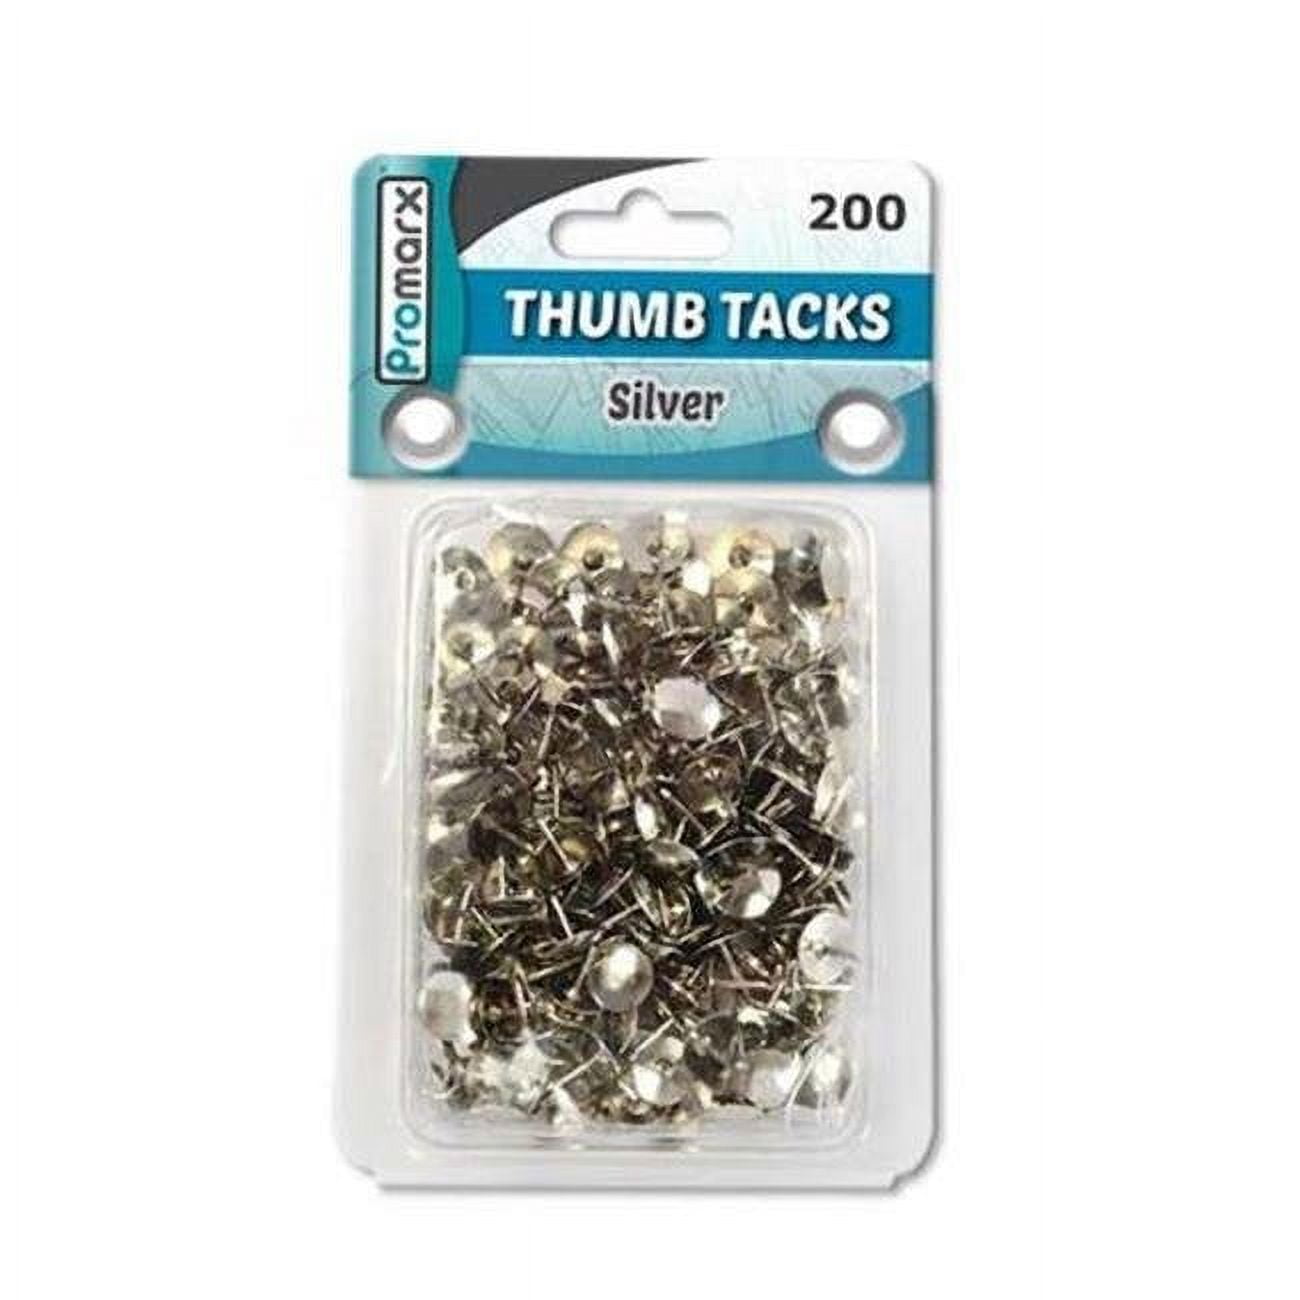 2324295 Thumb Tack Silver - 200 Count - Case Of 48